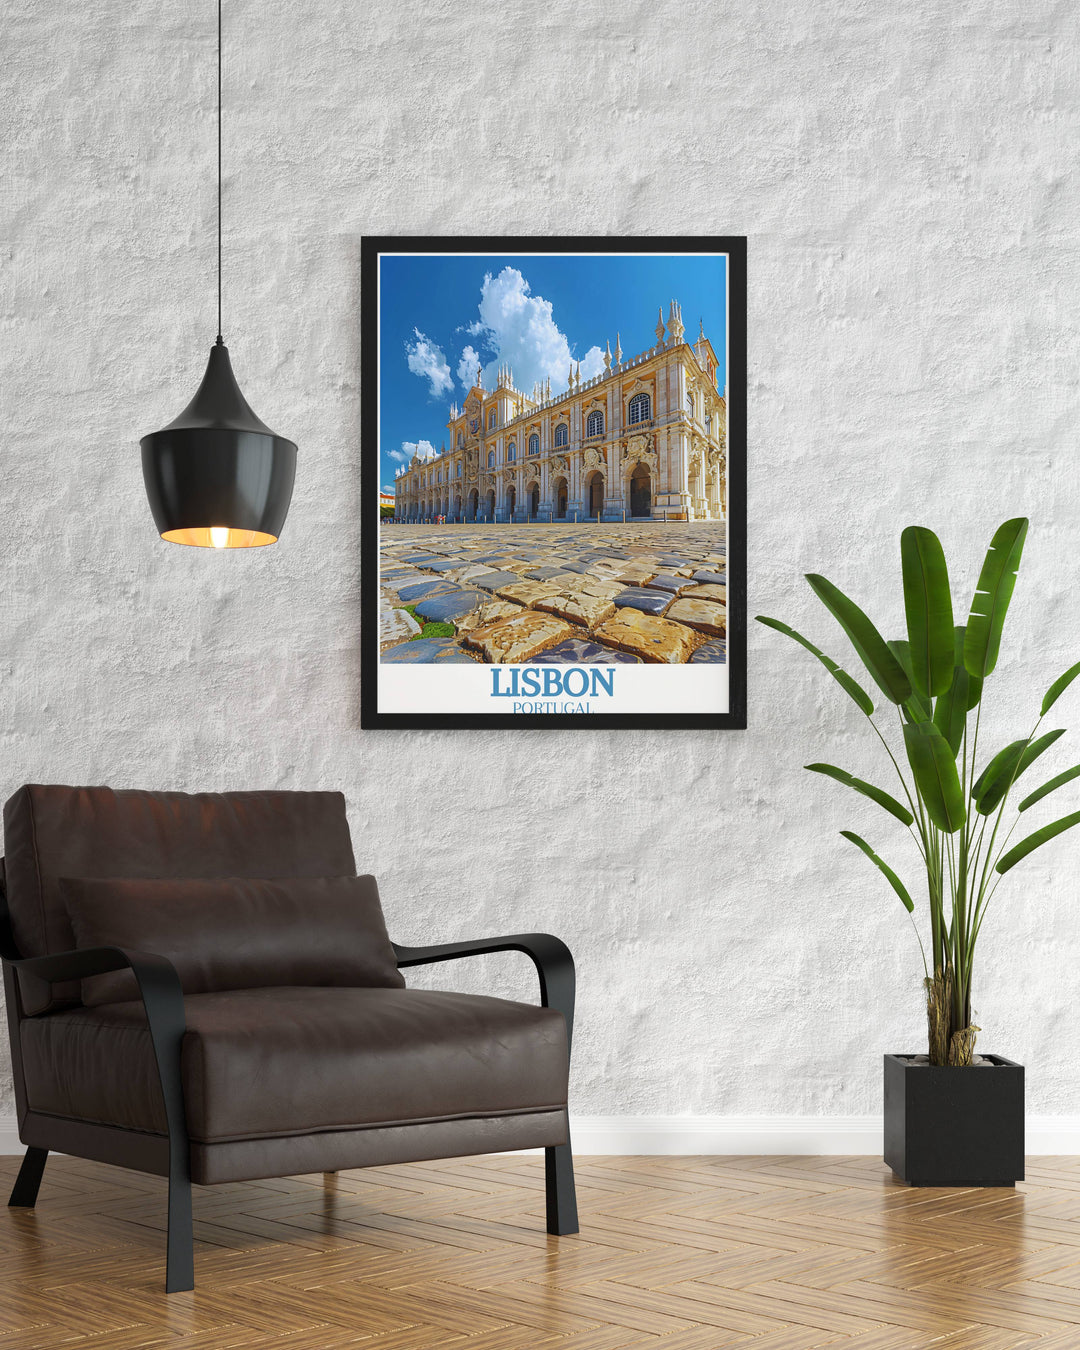 Our Portugal print of the Jeronimos Monastery Mosteiro dos Jeronimos is a stunning representation of Lisbons most famous architectural masterpiece. This wall art captures the essence of Portuguese heritage and design.